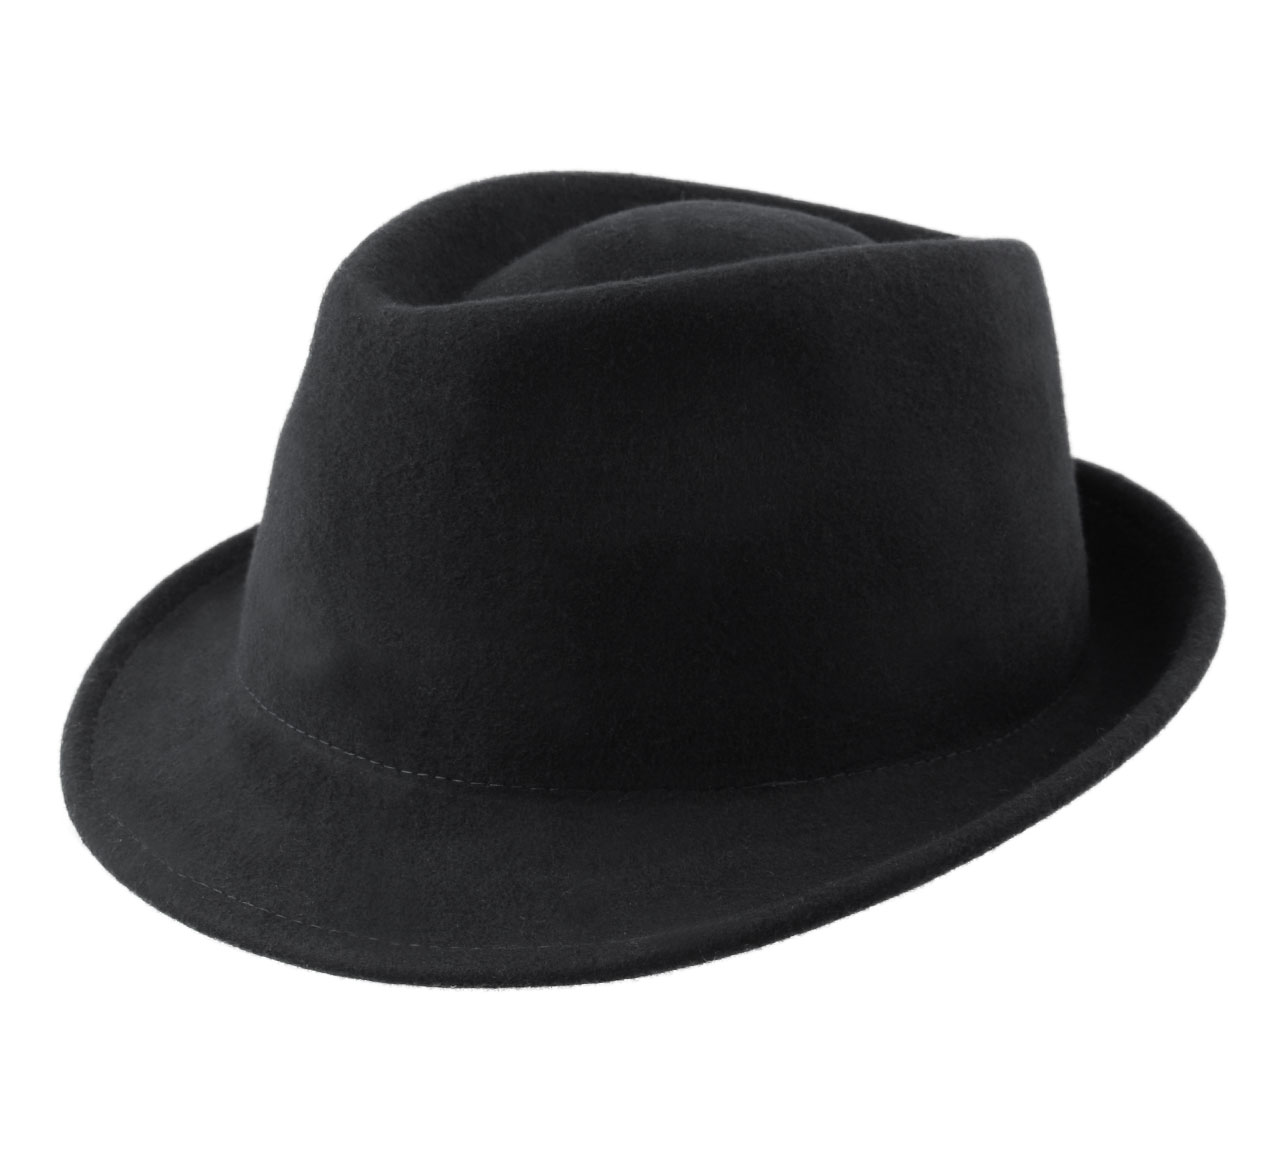 100% Wool Trilby Fedora Hat Handmade in Italy